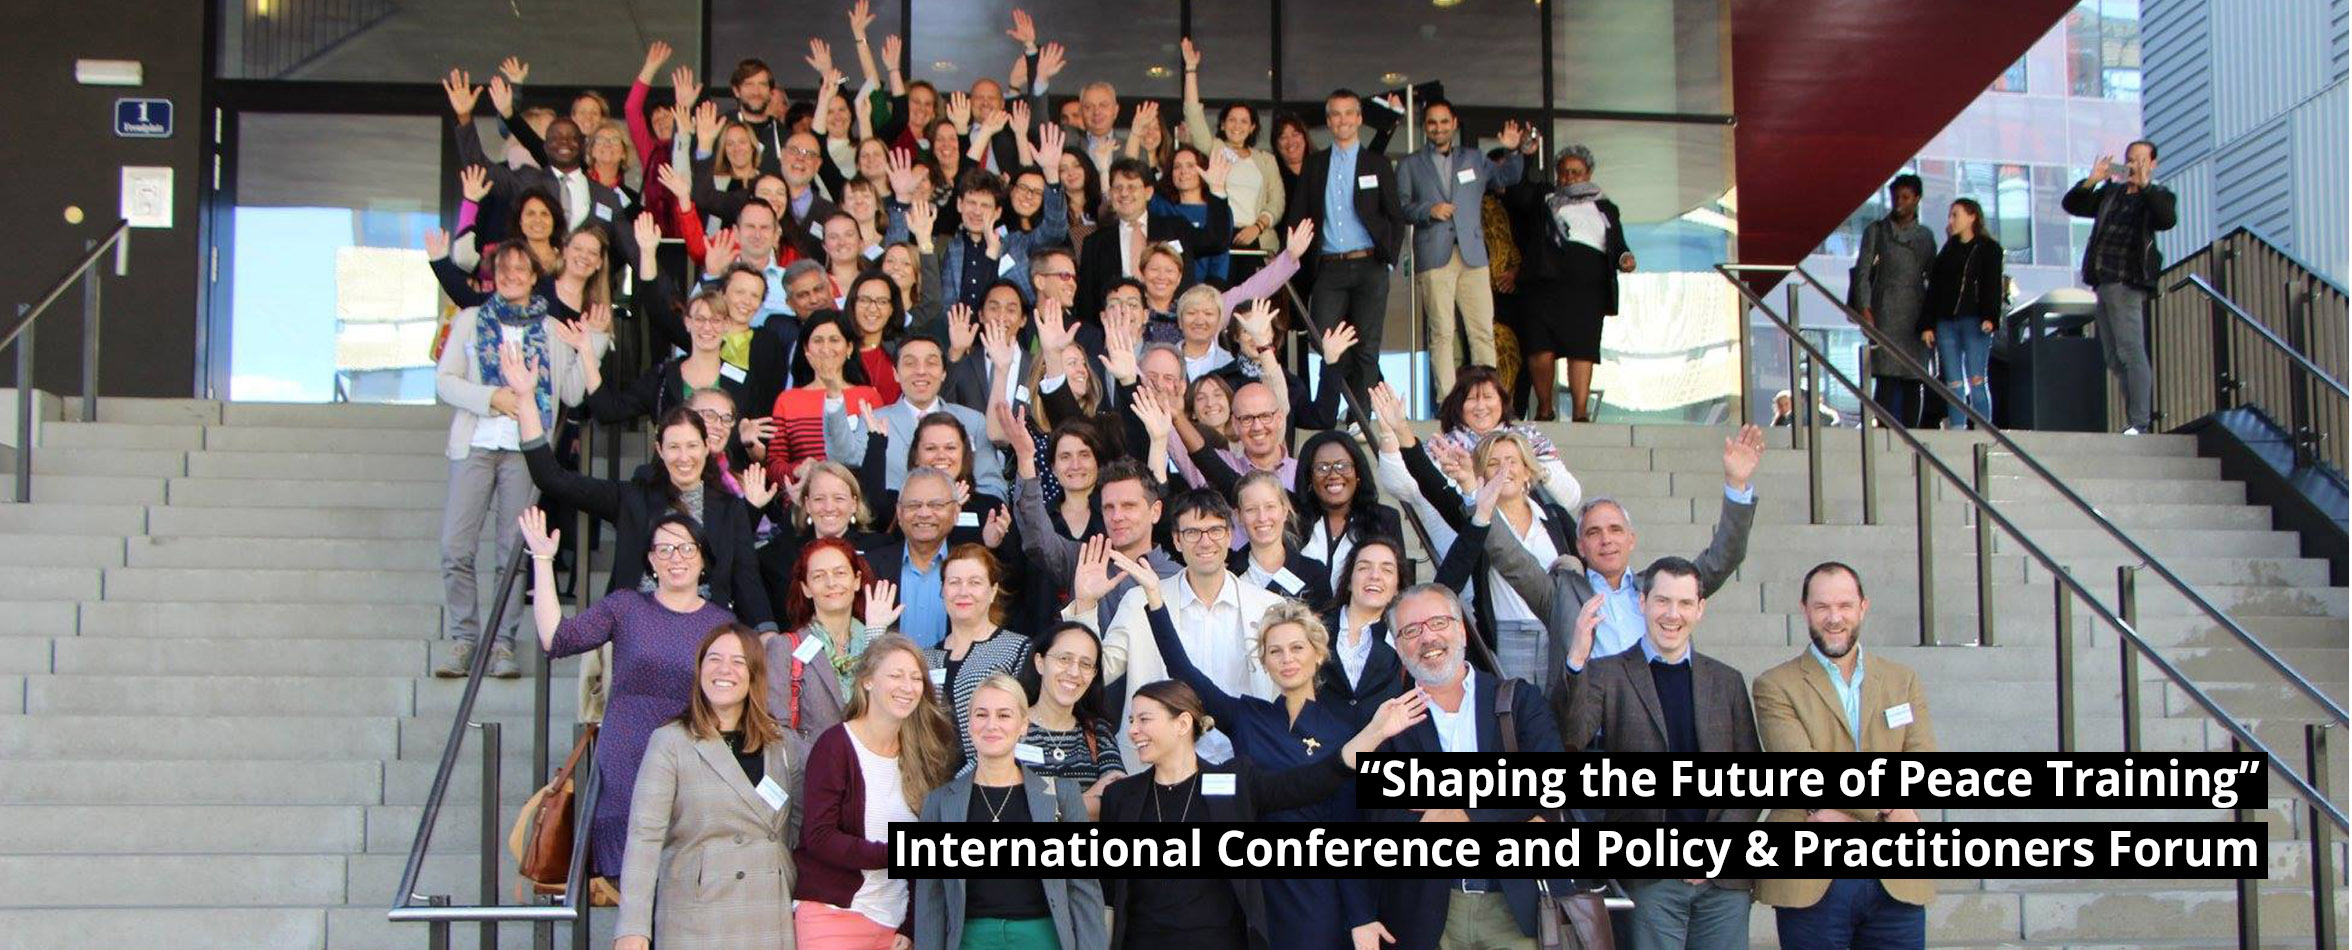 slide-2 “Shaping the Future of Peace Training” International Conference and Policy & Practitioners Forum – Vienna, October 1th & 2nd 2018